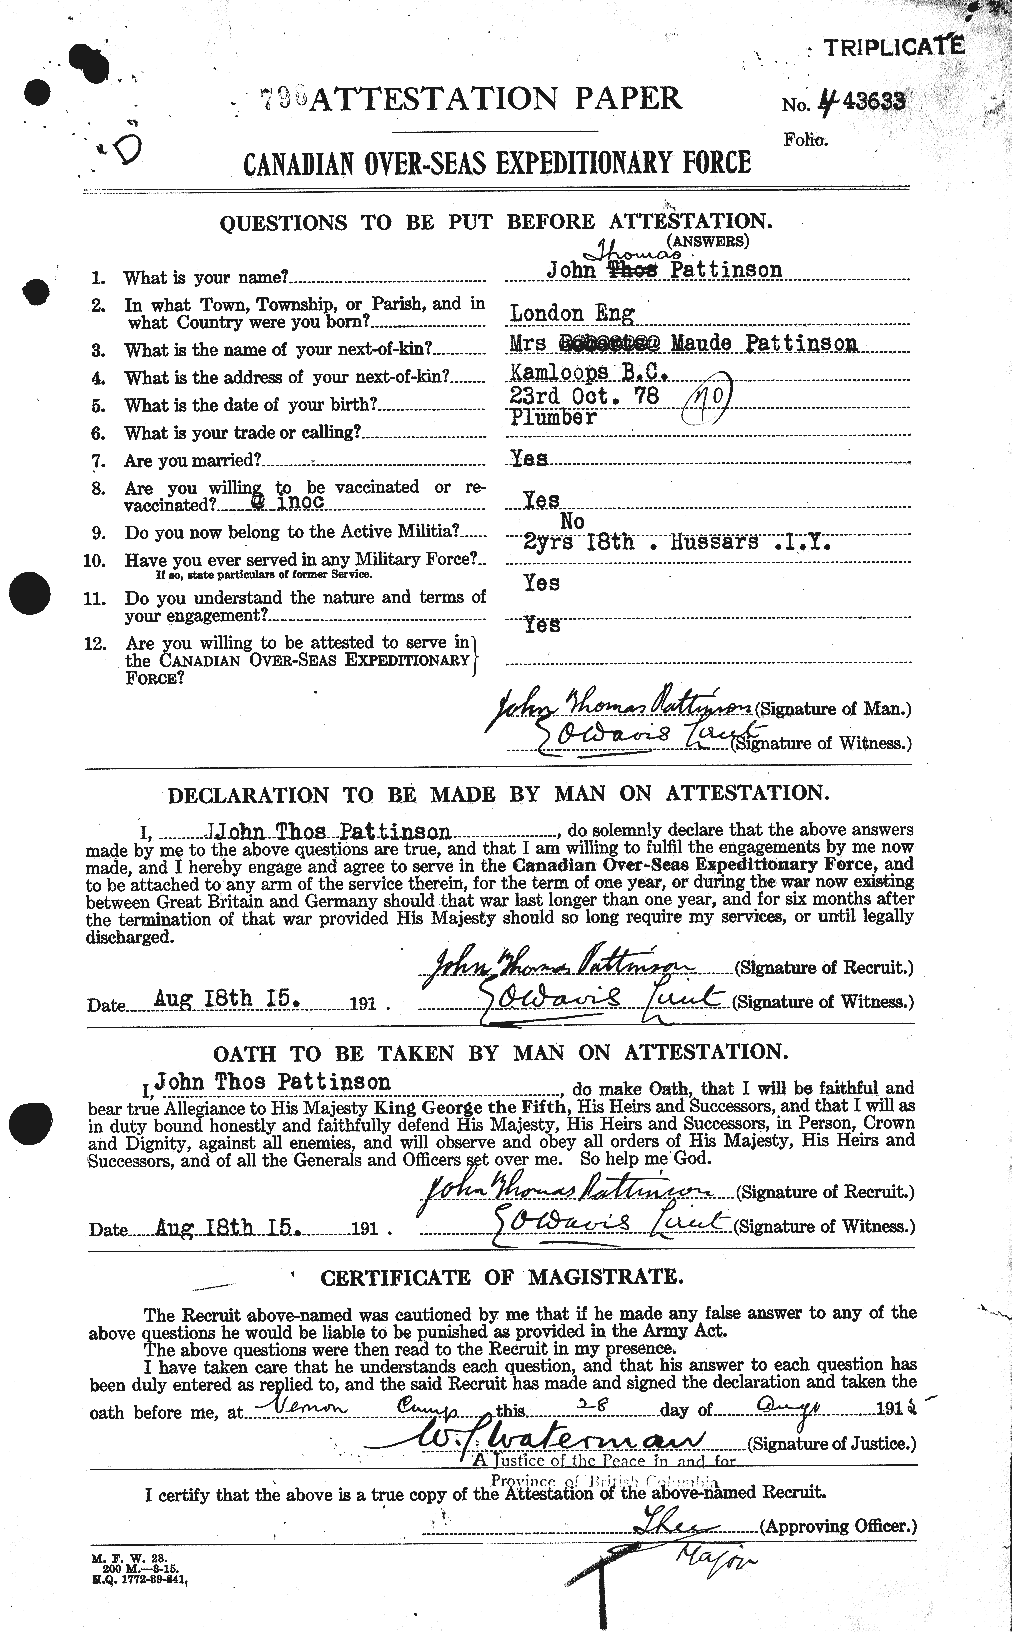 Personnel Records of the First World War - CEF 568907a